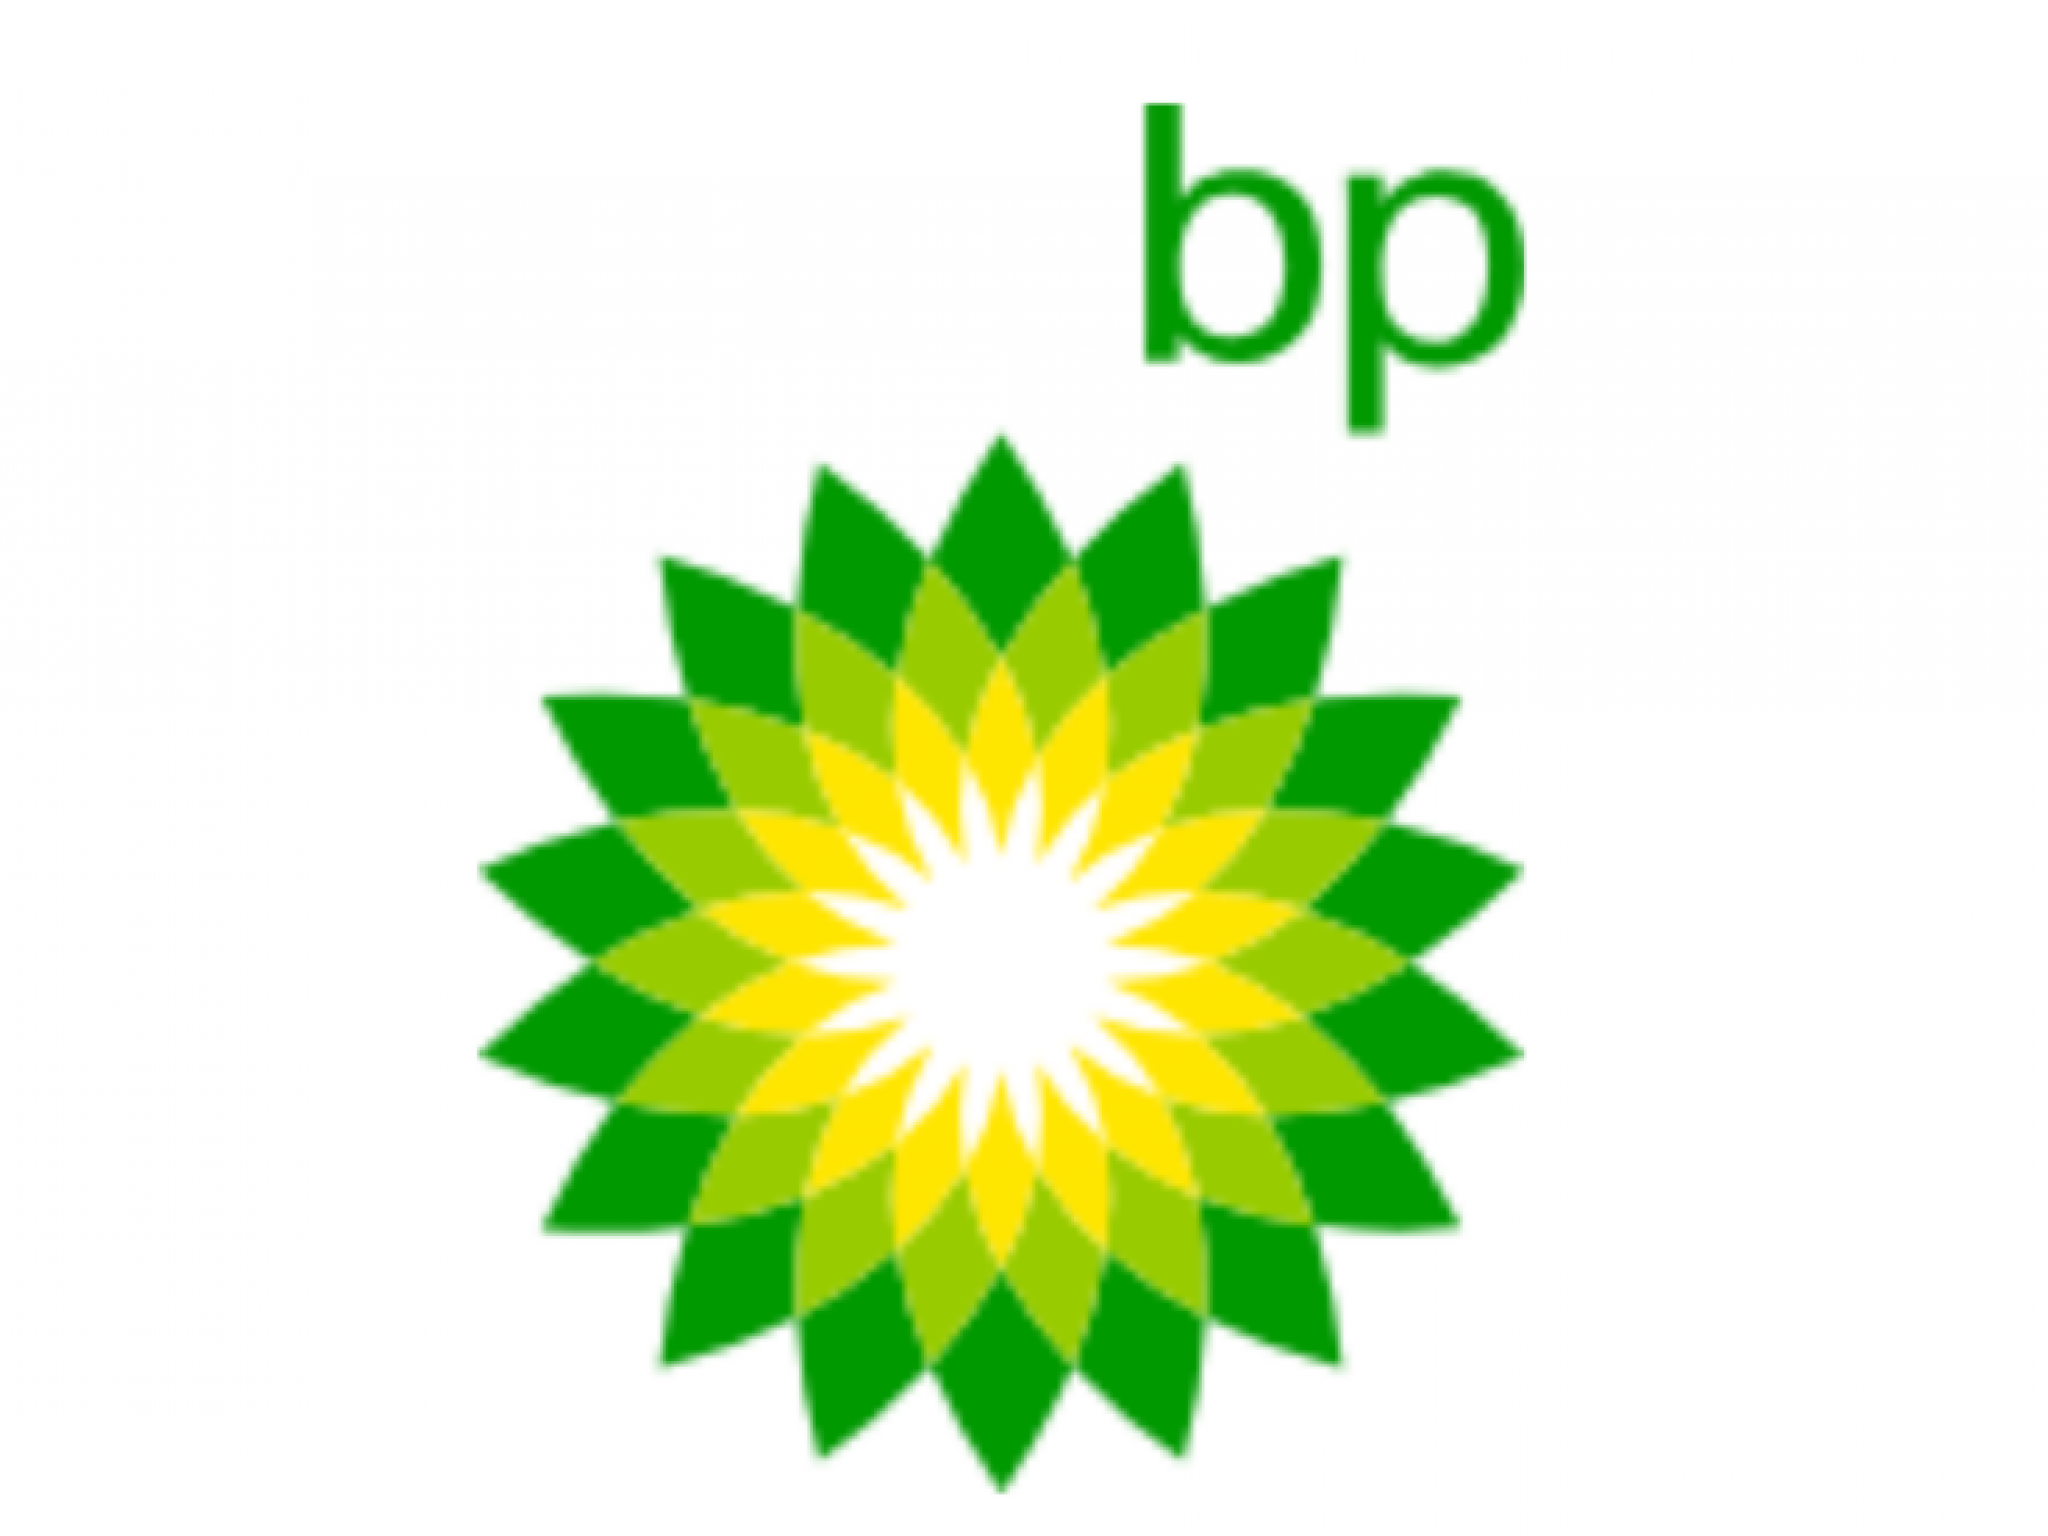  bp-eyes-biofuel-dominance-in-brazil-with-expansion-plans-report 